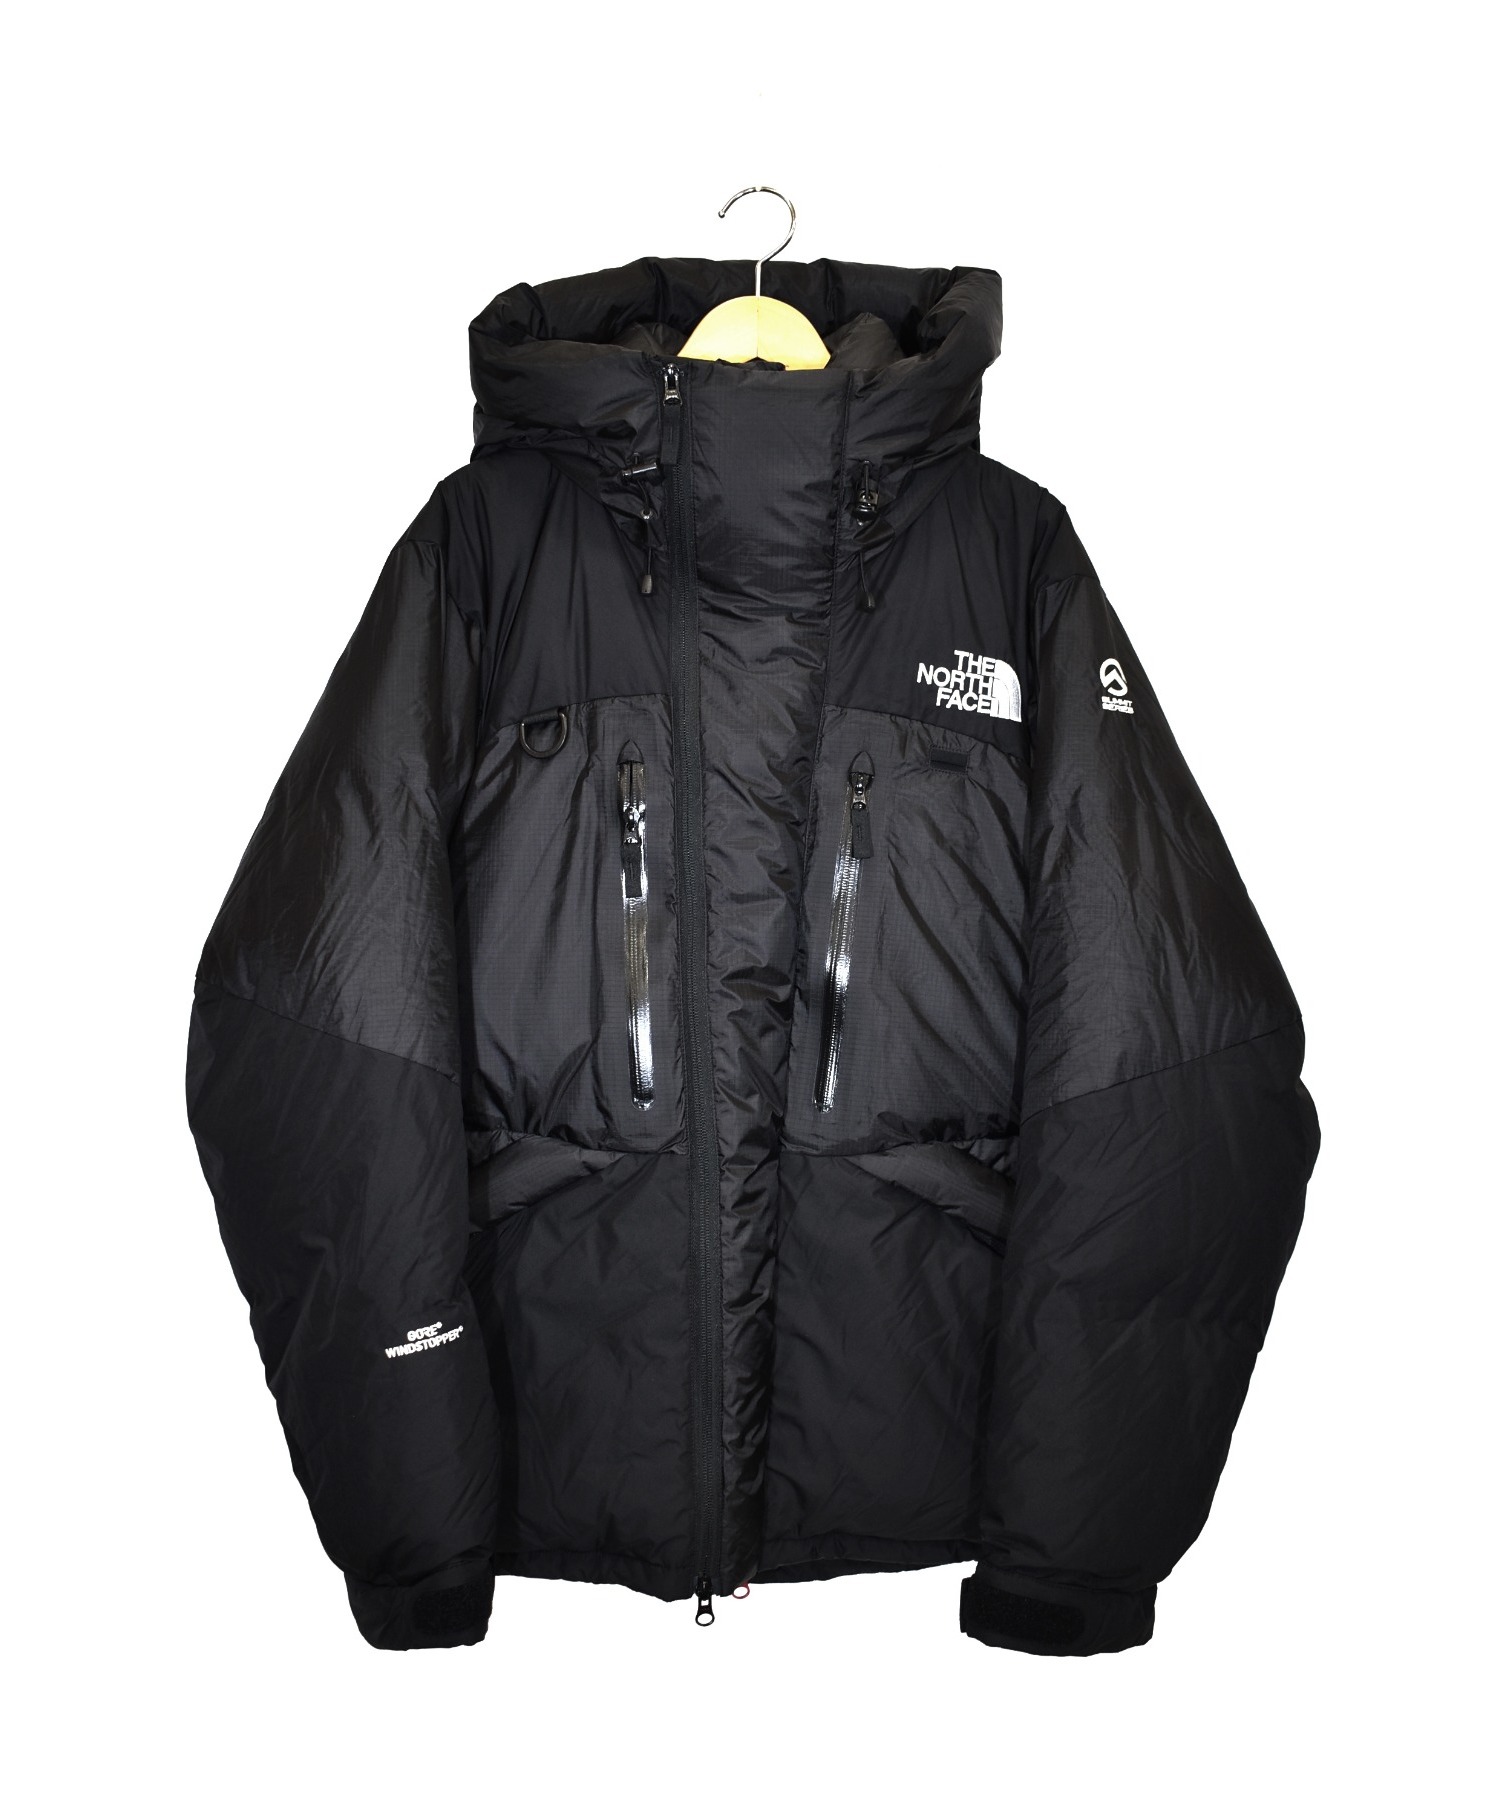 THE NORTH FACE - THE NORTH FACE ヒマラヤンパーカー ND91821 サイズ